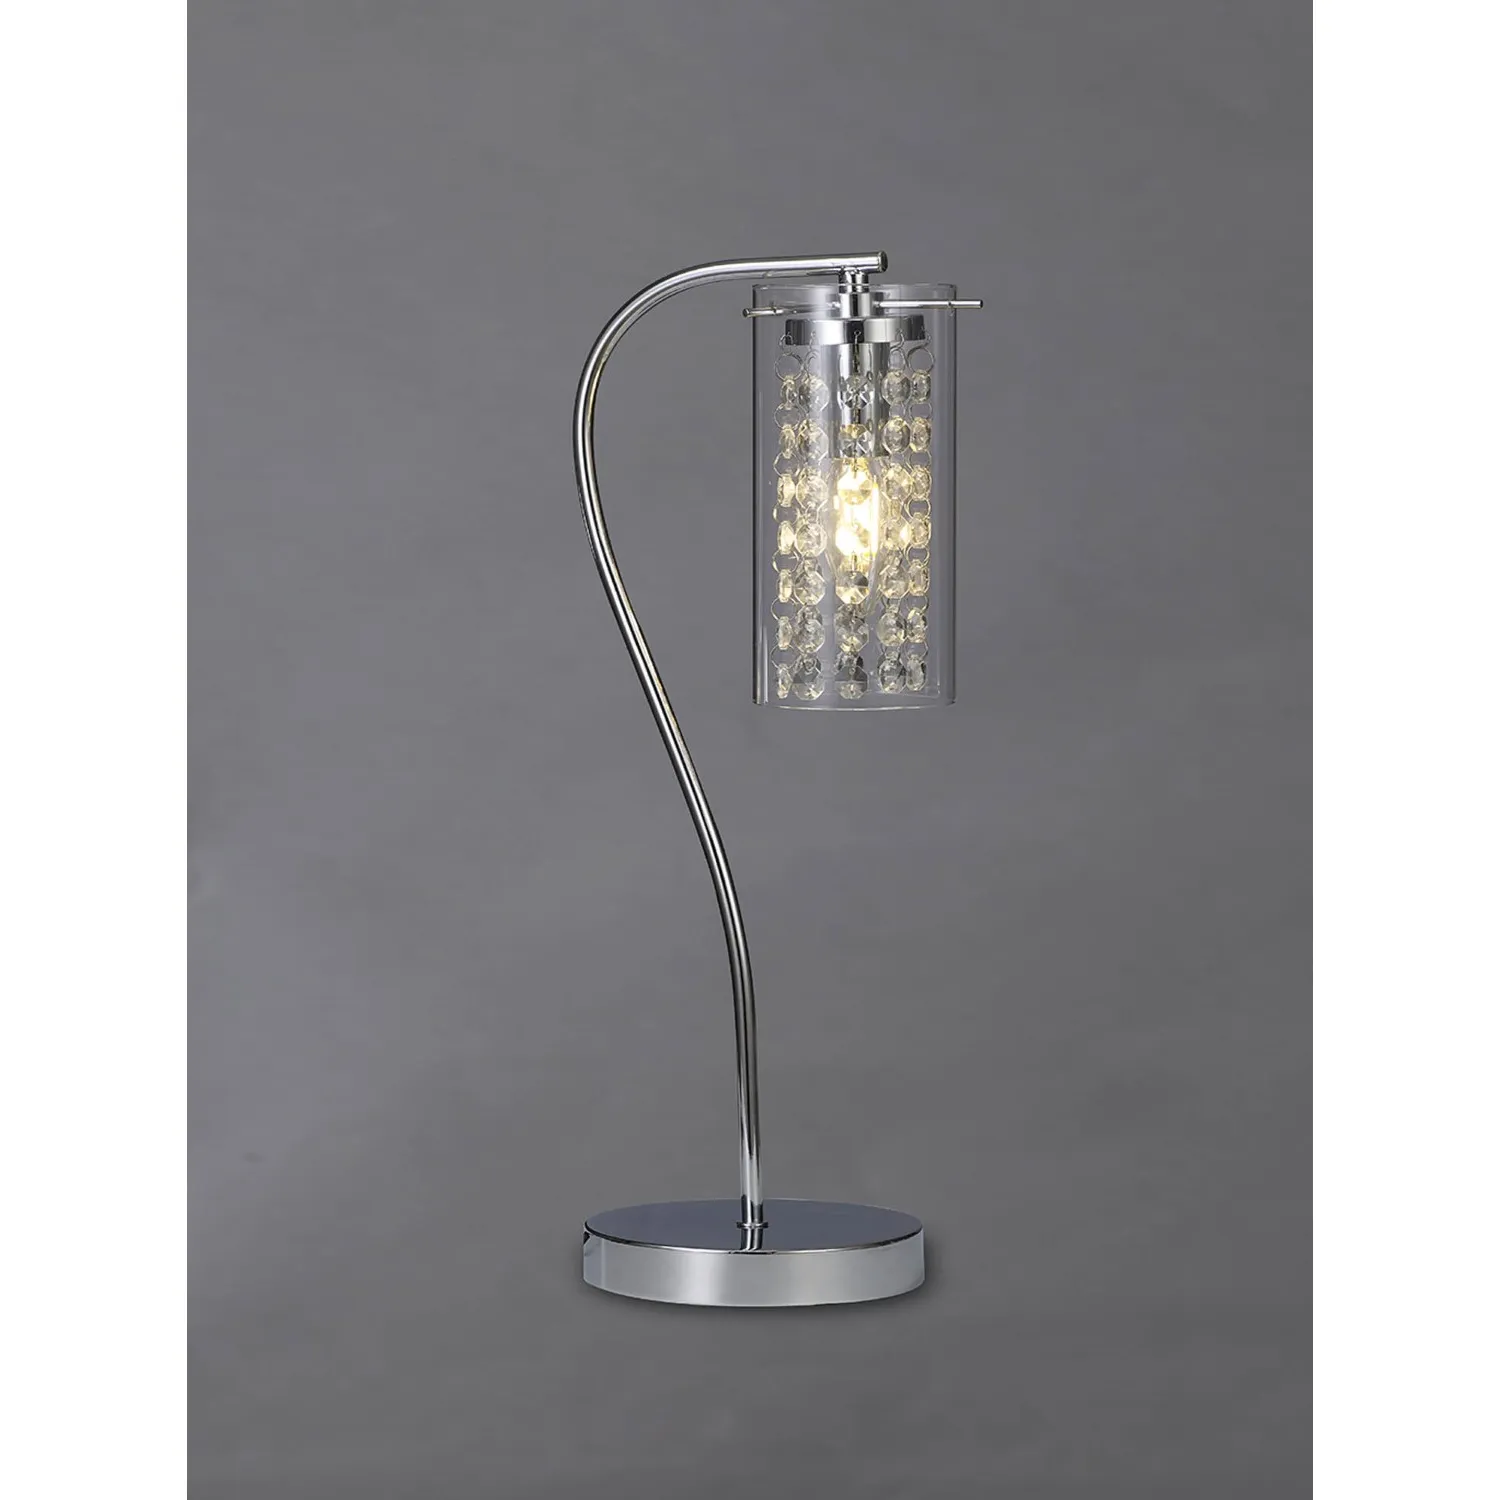 Cheshunt Table Lamp Switched, 1 x E14, Polished Chrome Crystal Glass